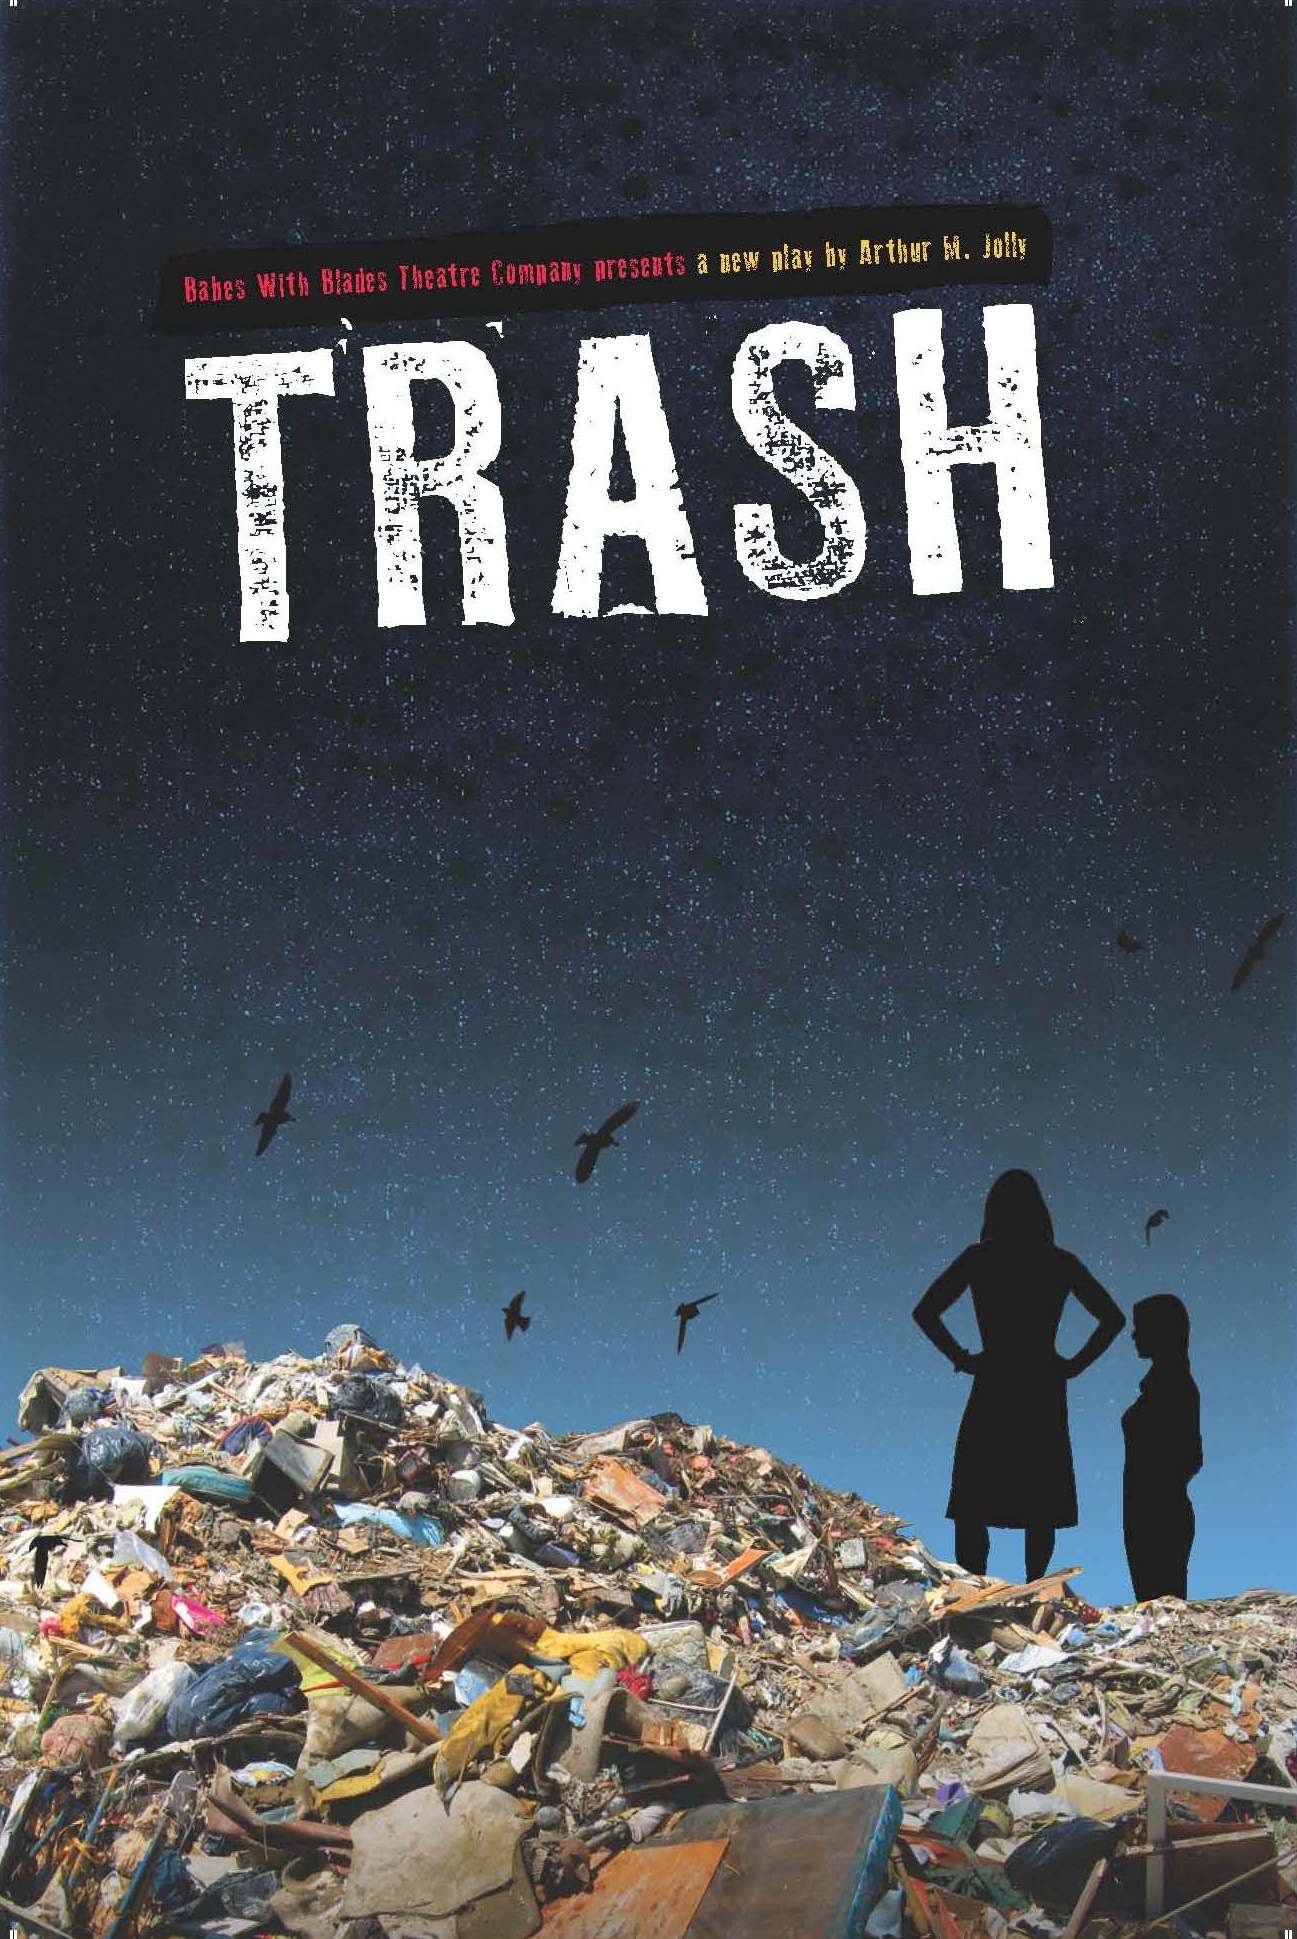 Trash poster of two shadowed figures standing on a landfill